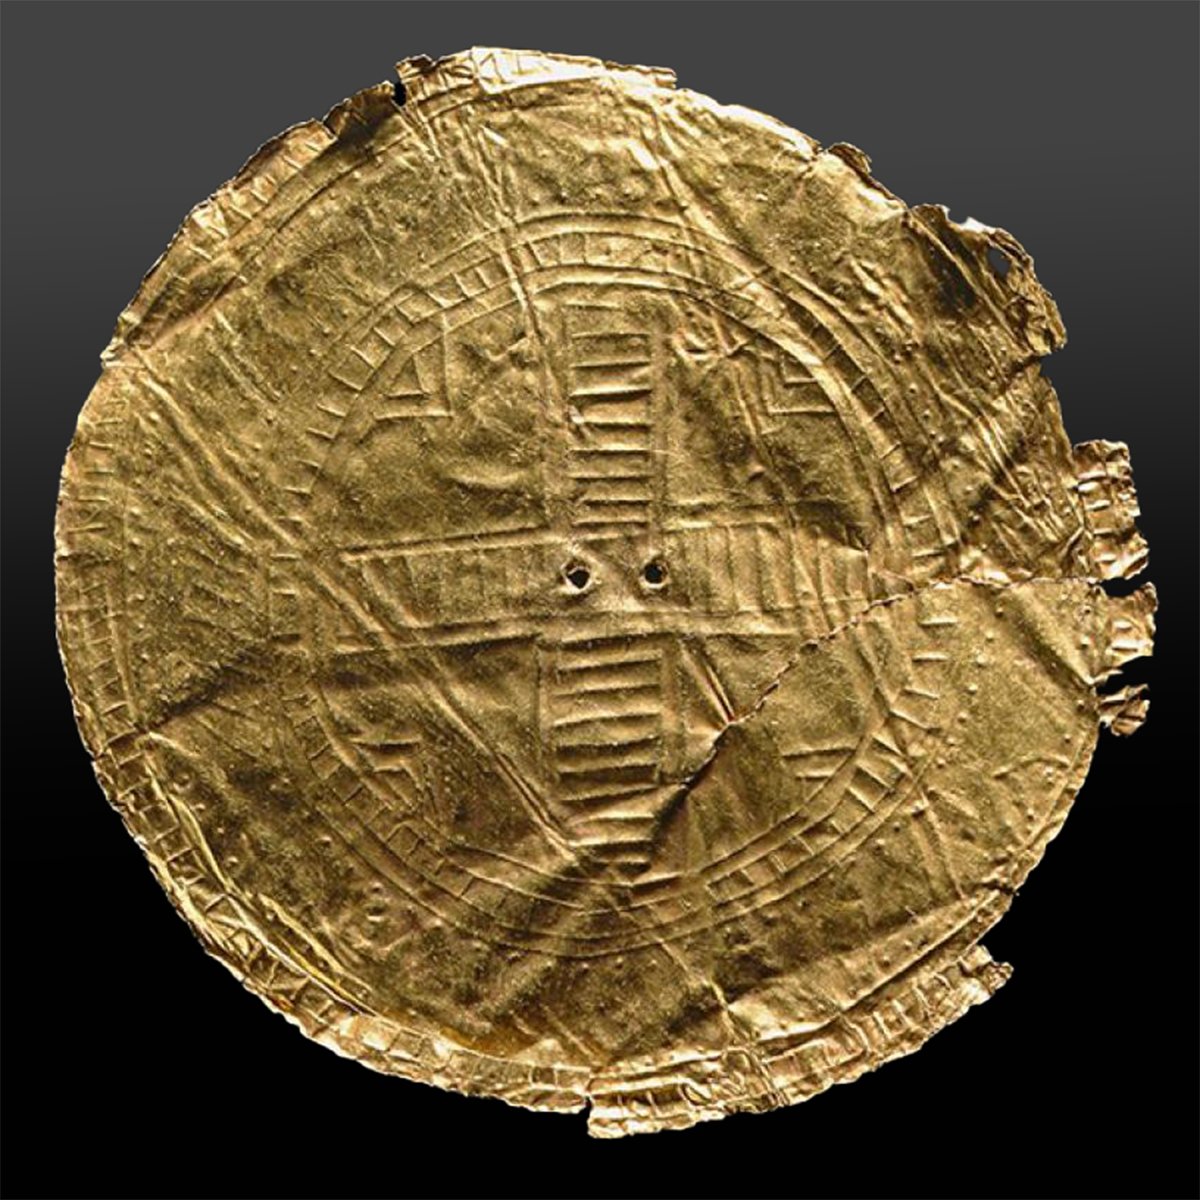 An ancient gold disc with embossed geometric patterns, identified as the Druid Sun Disc from Ballyshannon, Ireland, dated between 2500–2150 BC.